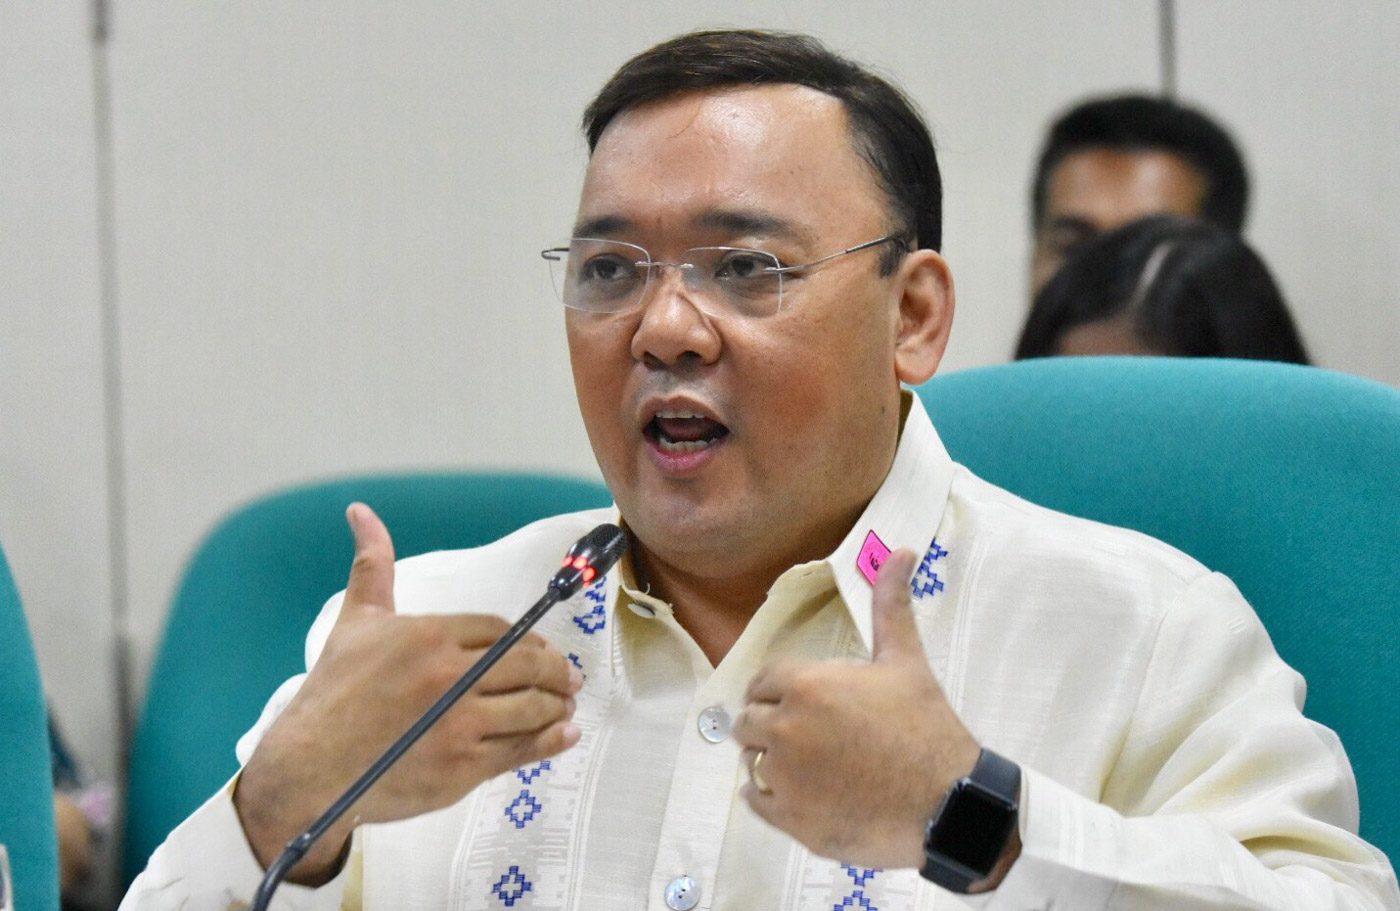 WATCH: Roque told people not to vote for ‘self-professed murderer’ Duterte